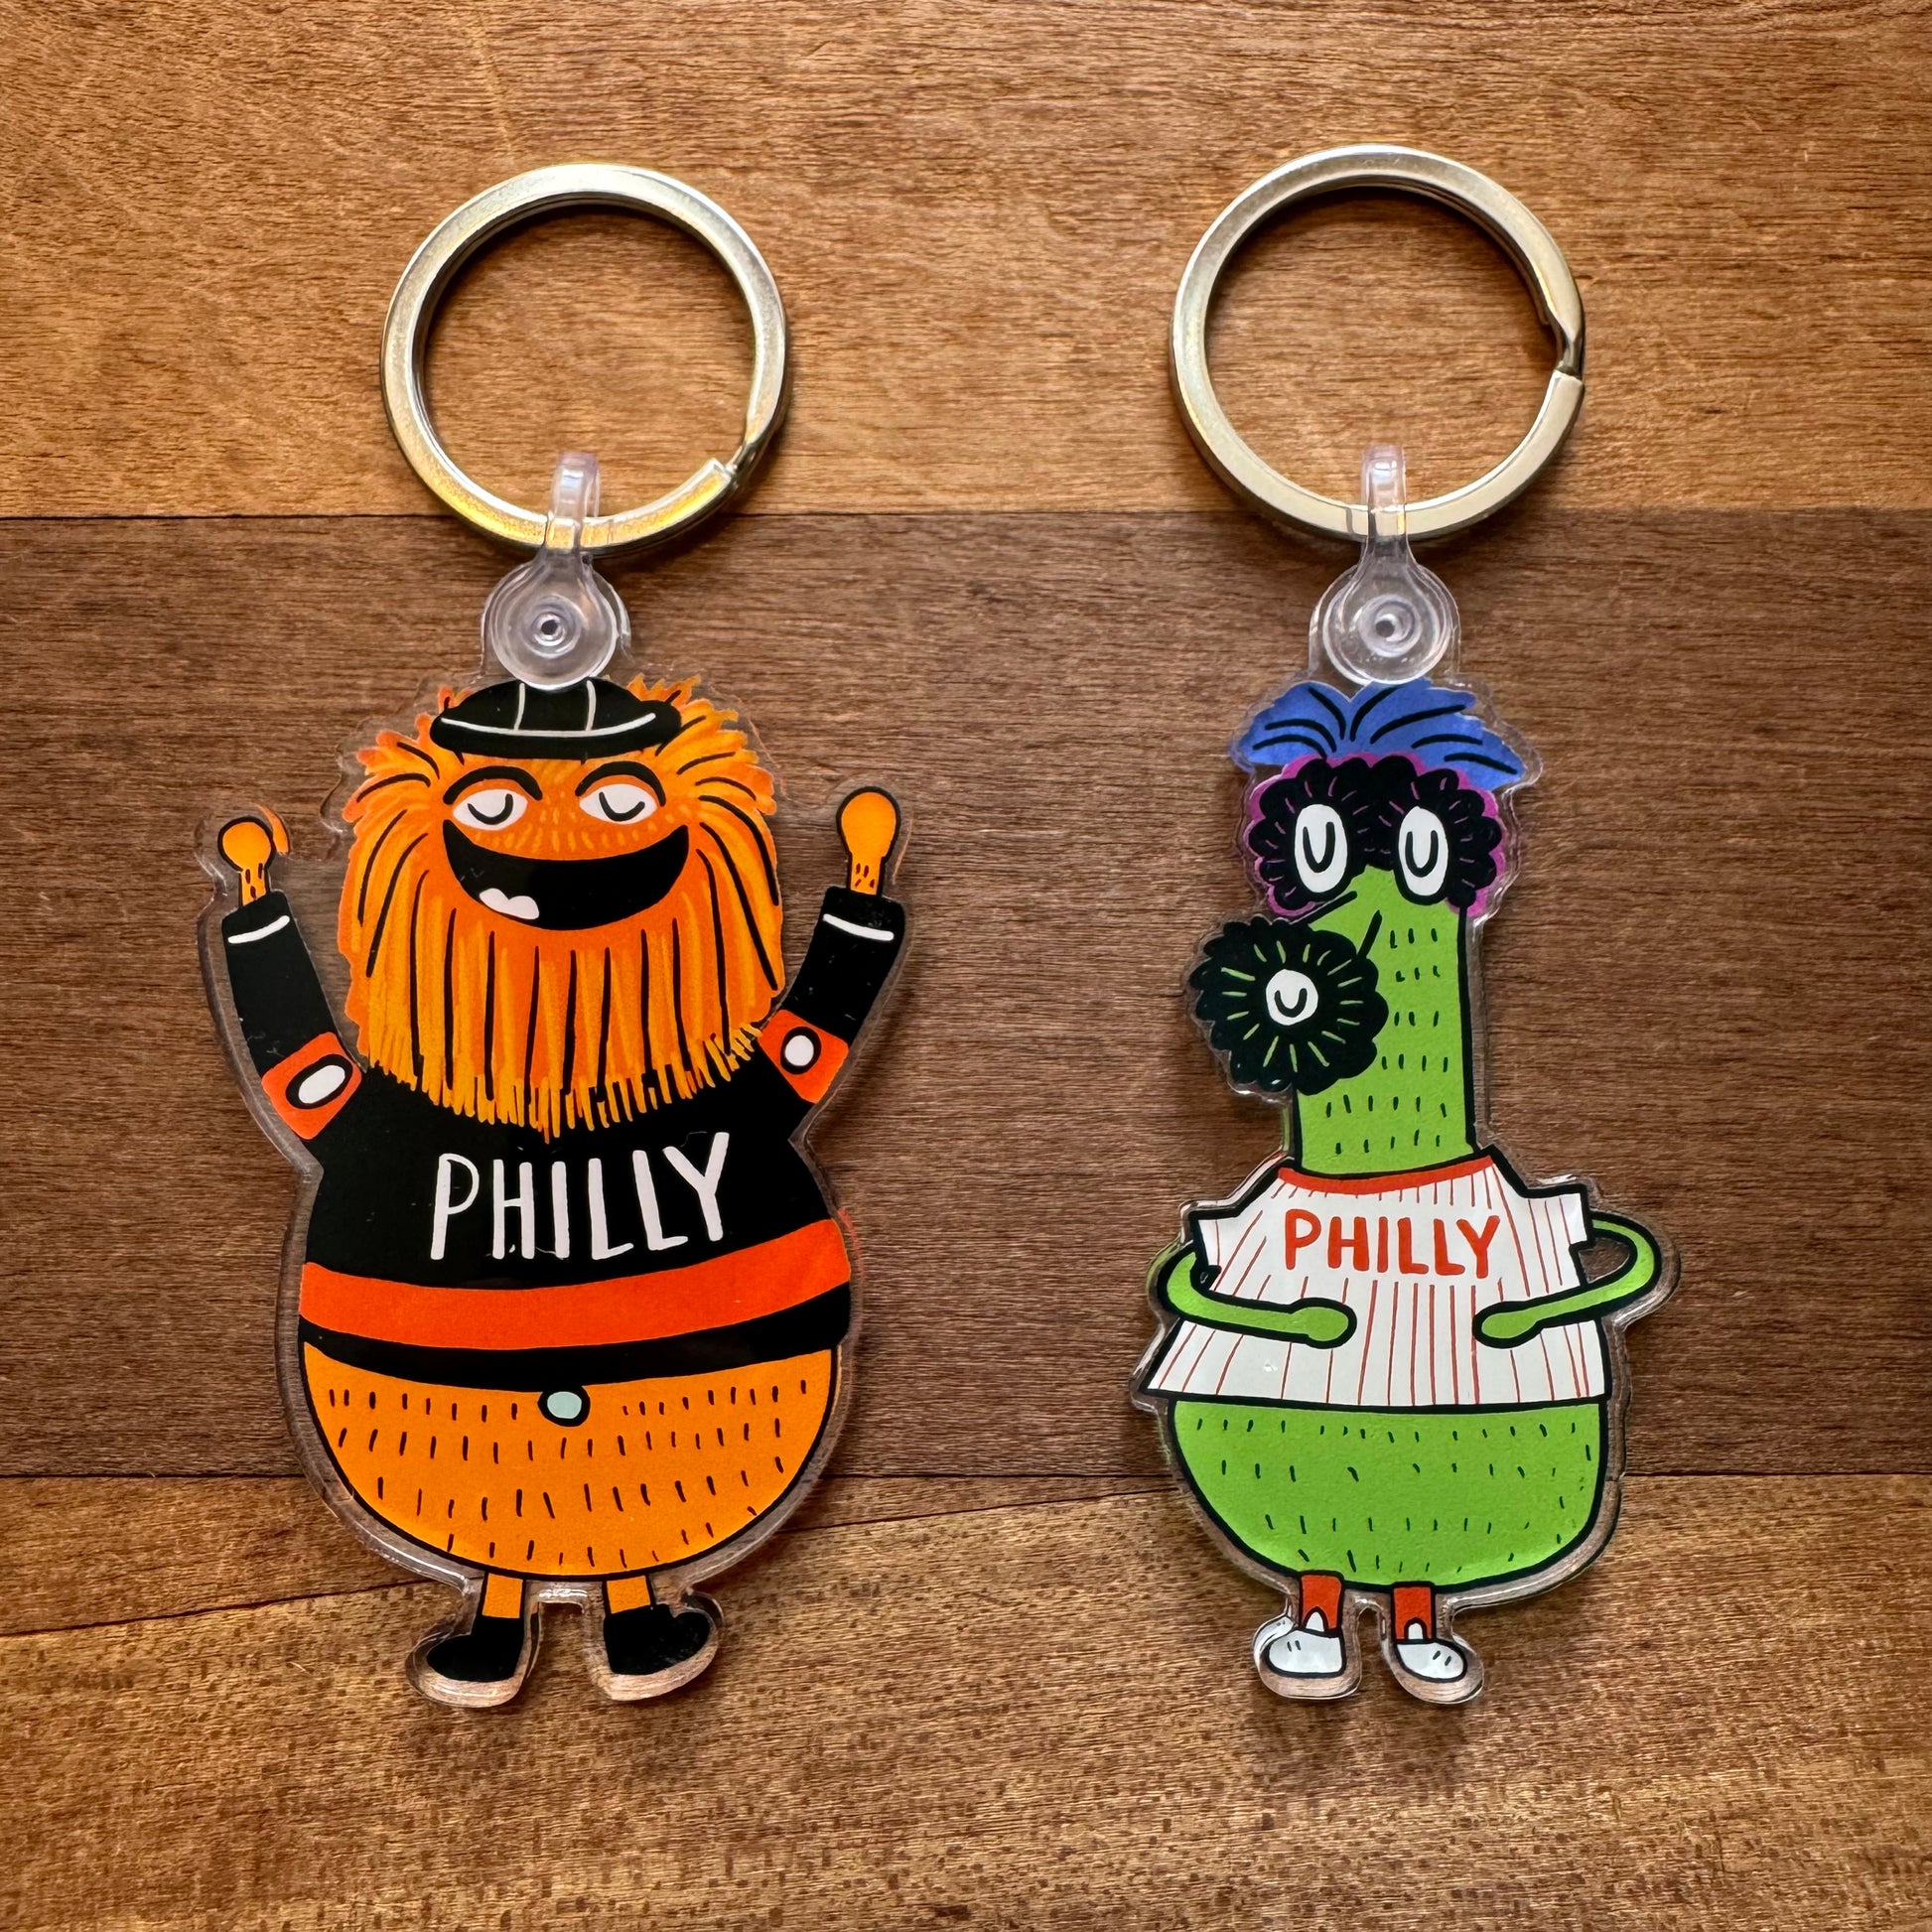 The Gritty & Phanatic Keychains from Ana Thorne feature two vibrant characters: an orange, bearded figure in a black "Philly" shirt and a green, furry character with glasses in a white "Philly" jersey.